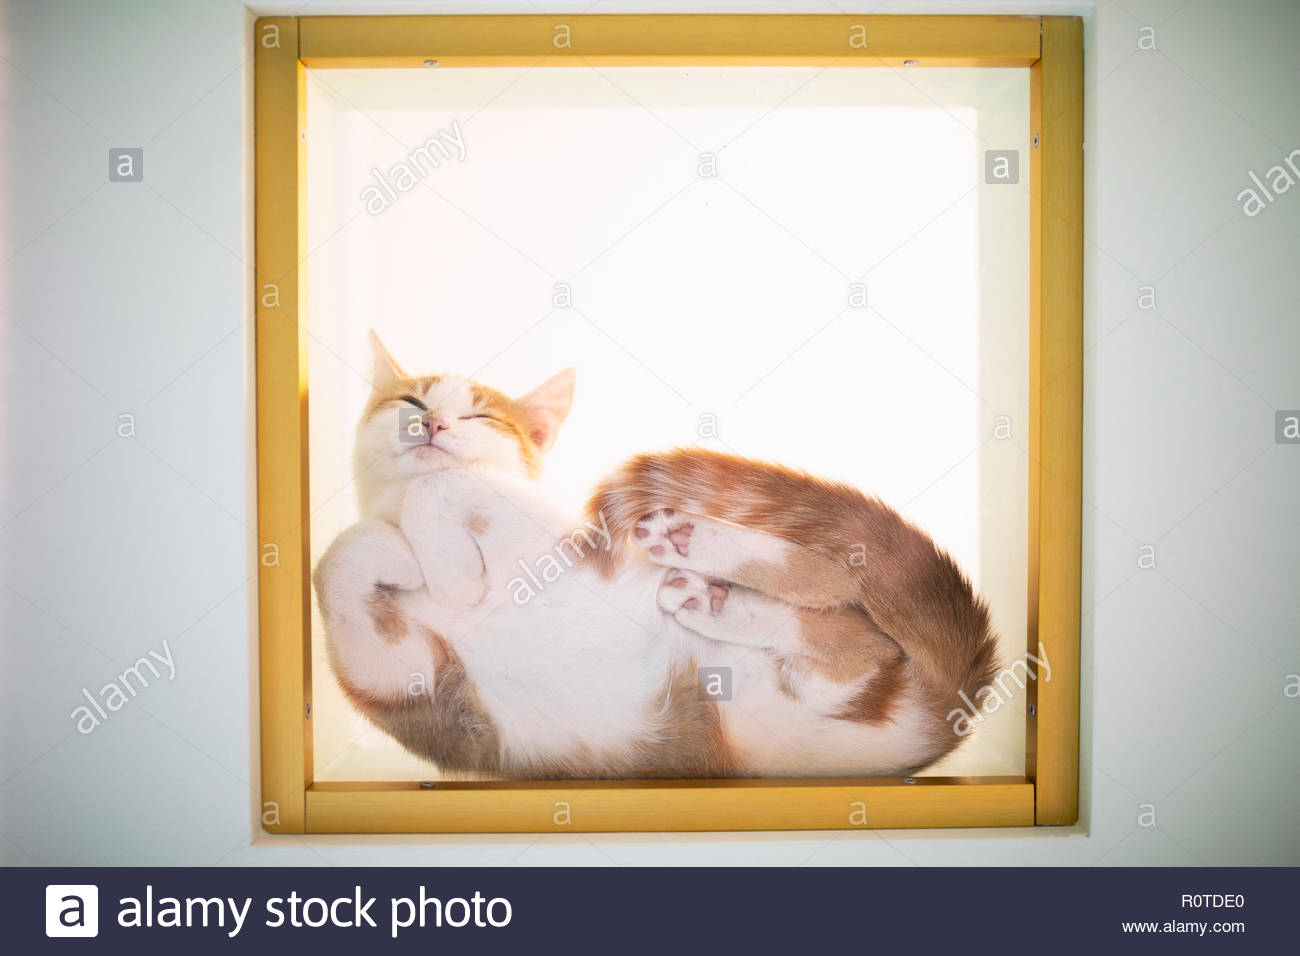 Cat pressed up against display window Stock Photo